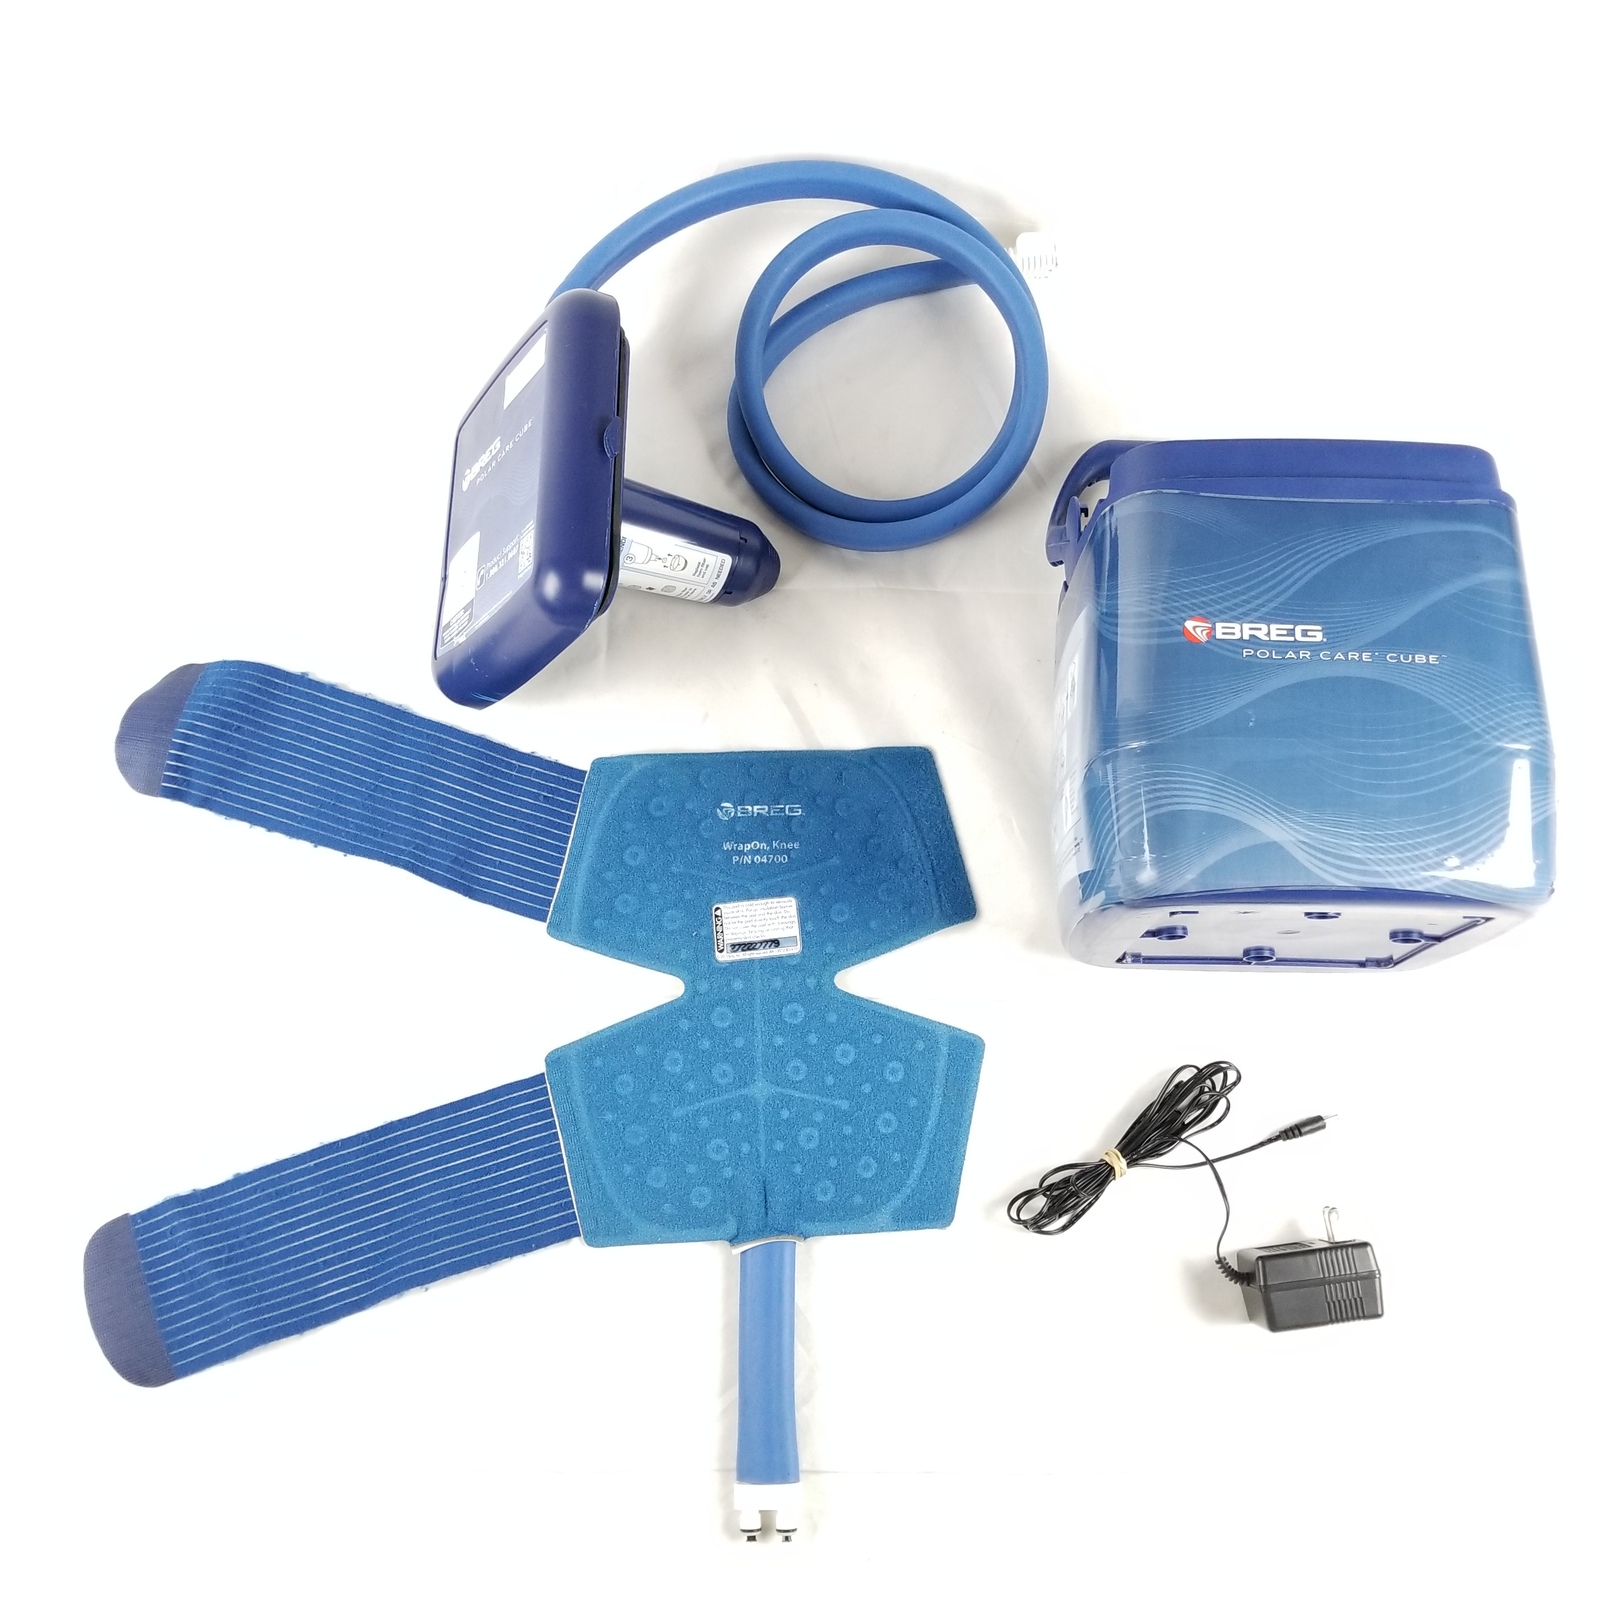 Breg Polar Care Cube Cold Therapy System w/ Pad, Power Cord, & Strap - $84.99